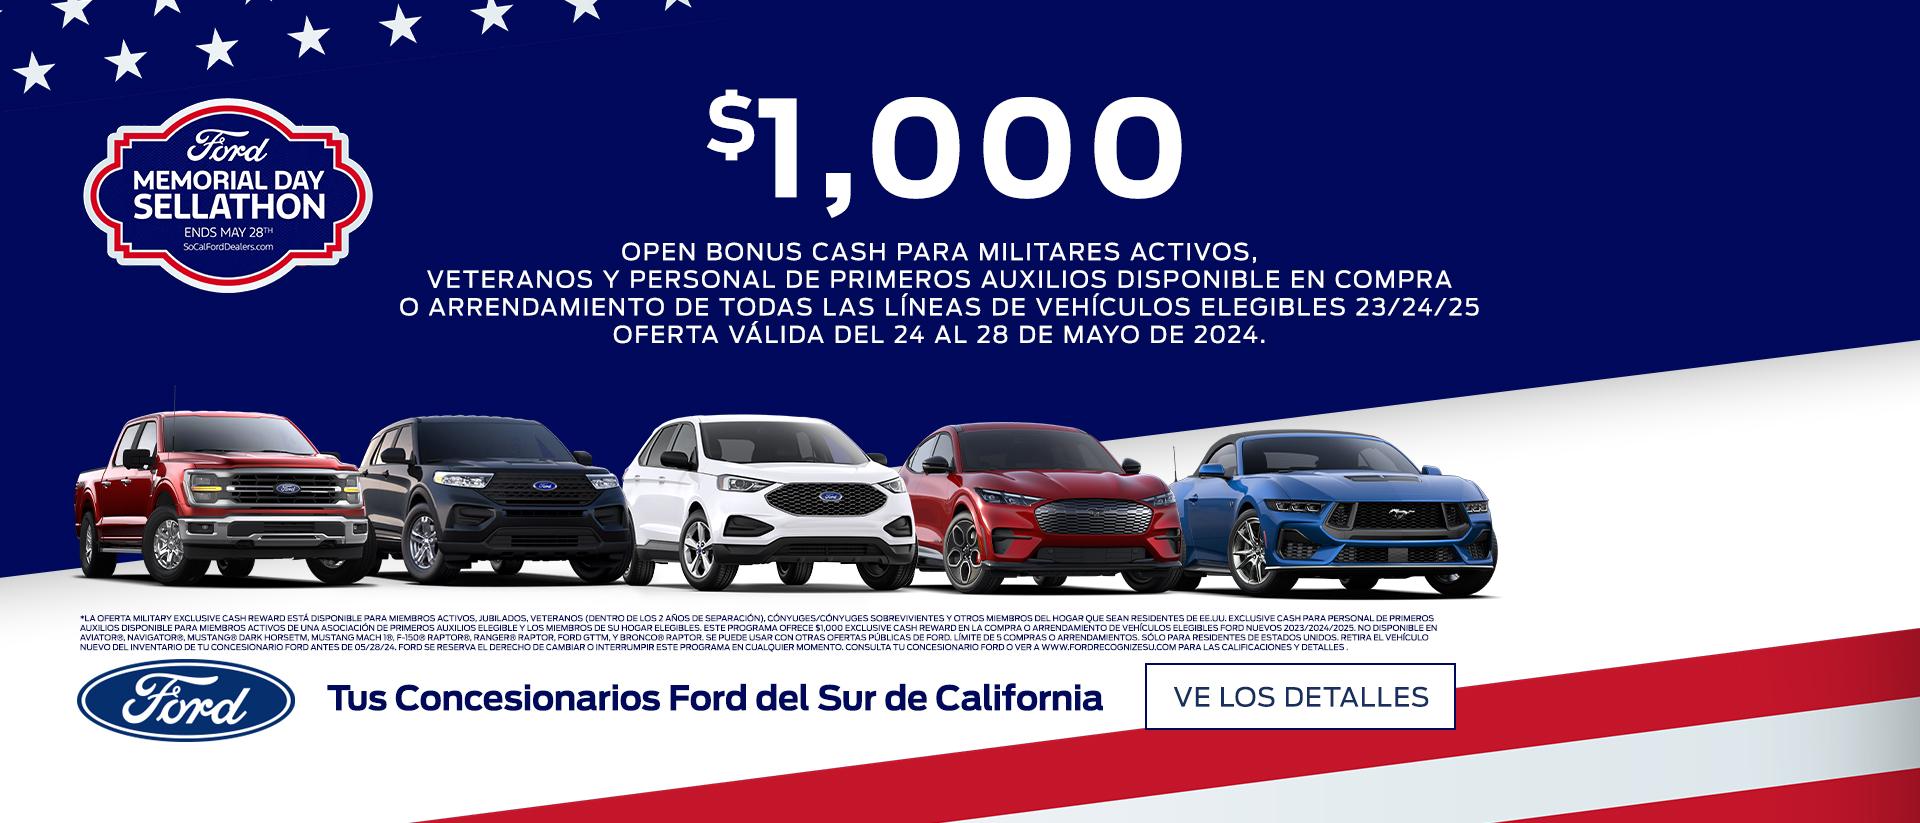 Special Offer for Military Personnel, Veterans &amp; First Responders | Memorial Day Sellathon | Southern California Ford Dealers